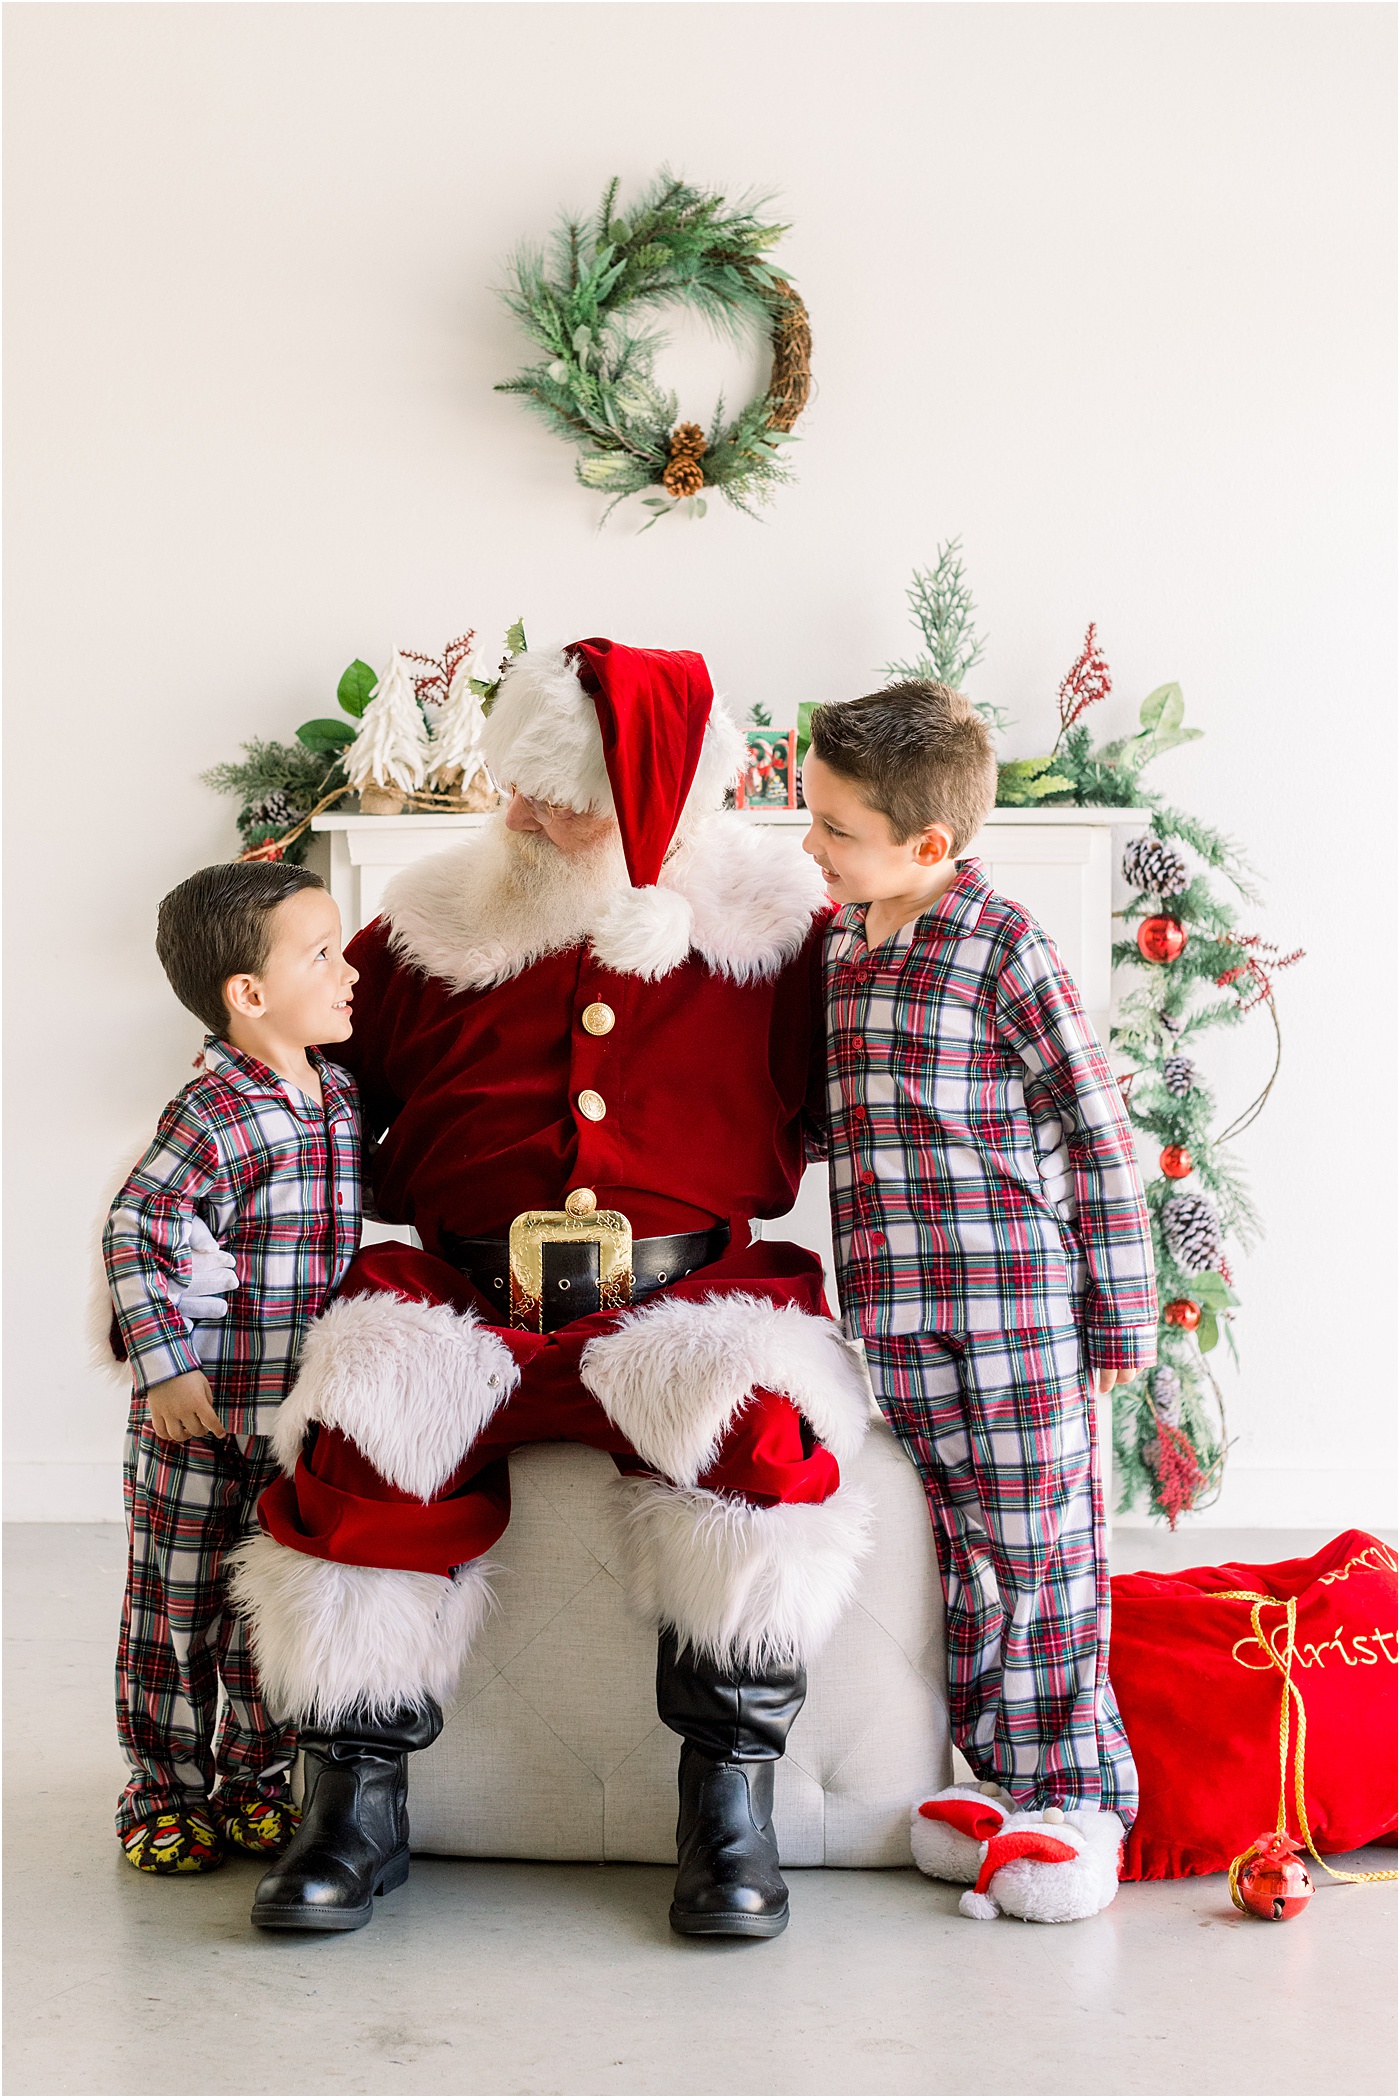 Kids wearing plaid pajamas during photos with Santa in Austin, TX by Sana Ahmed Photography.